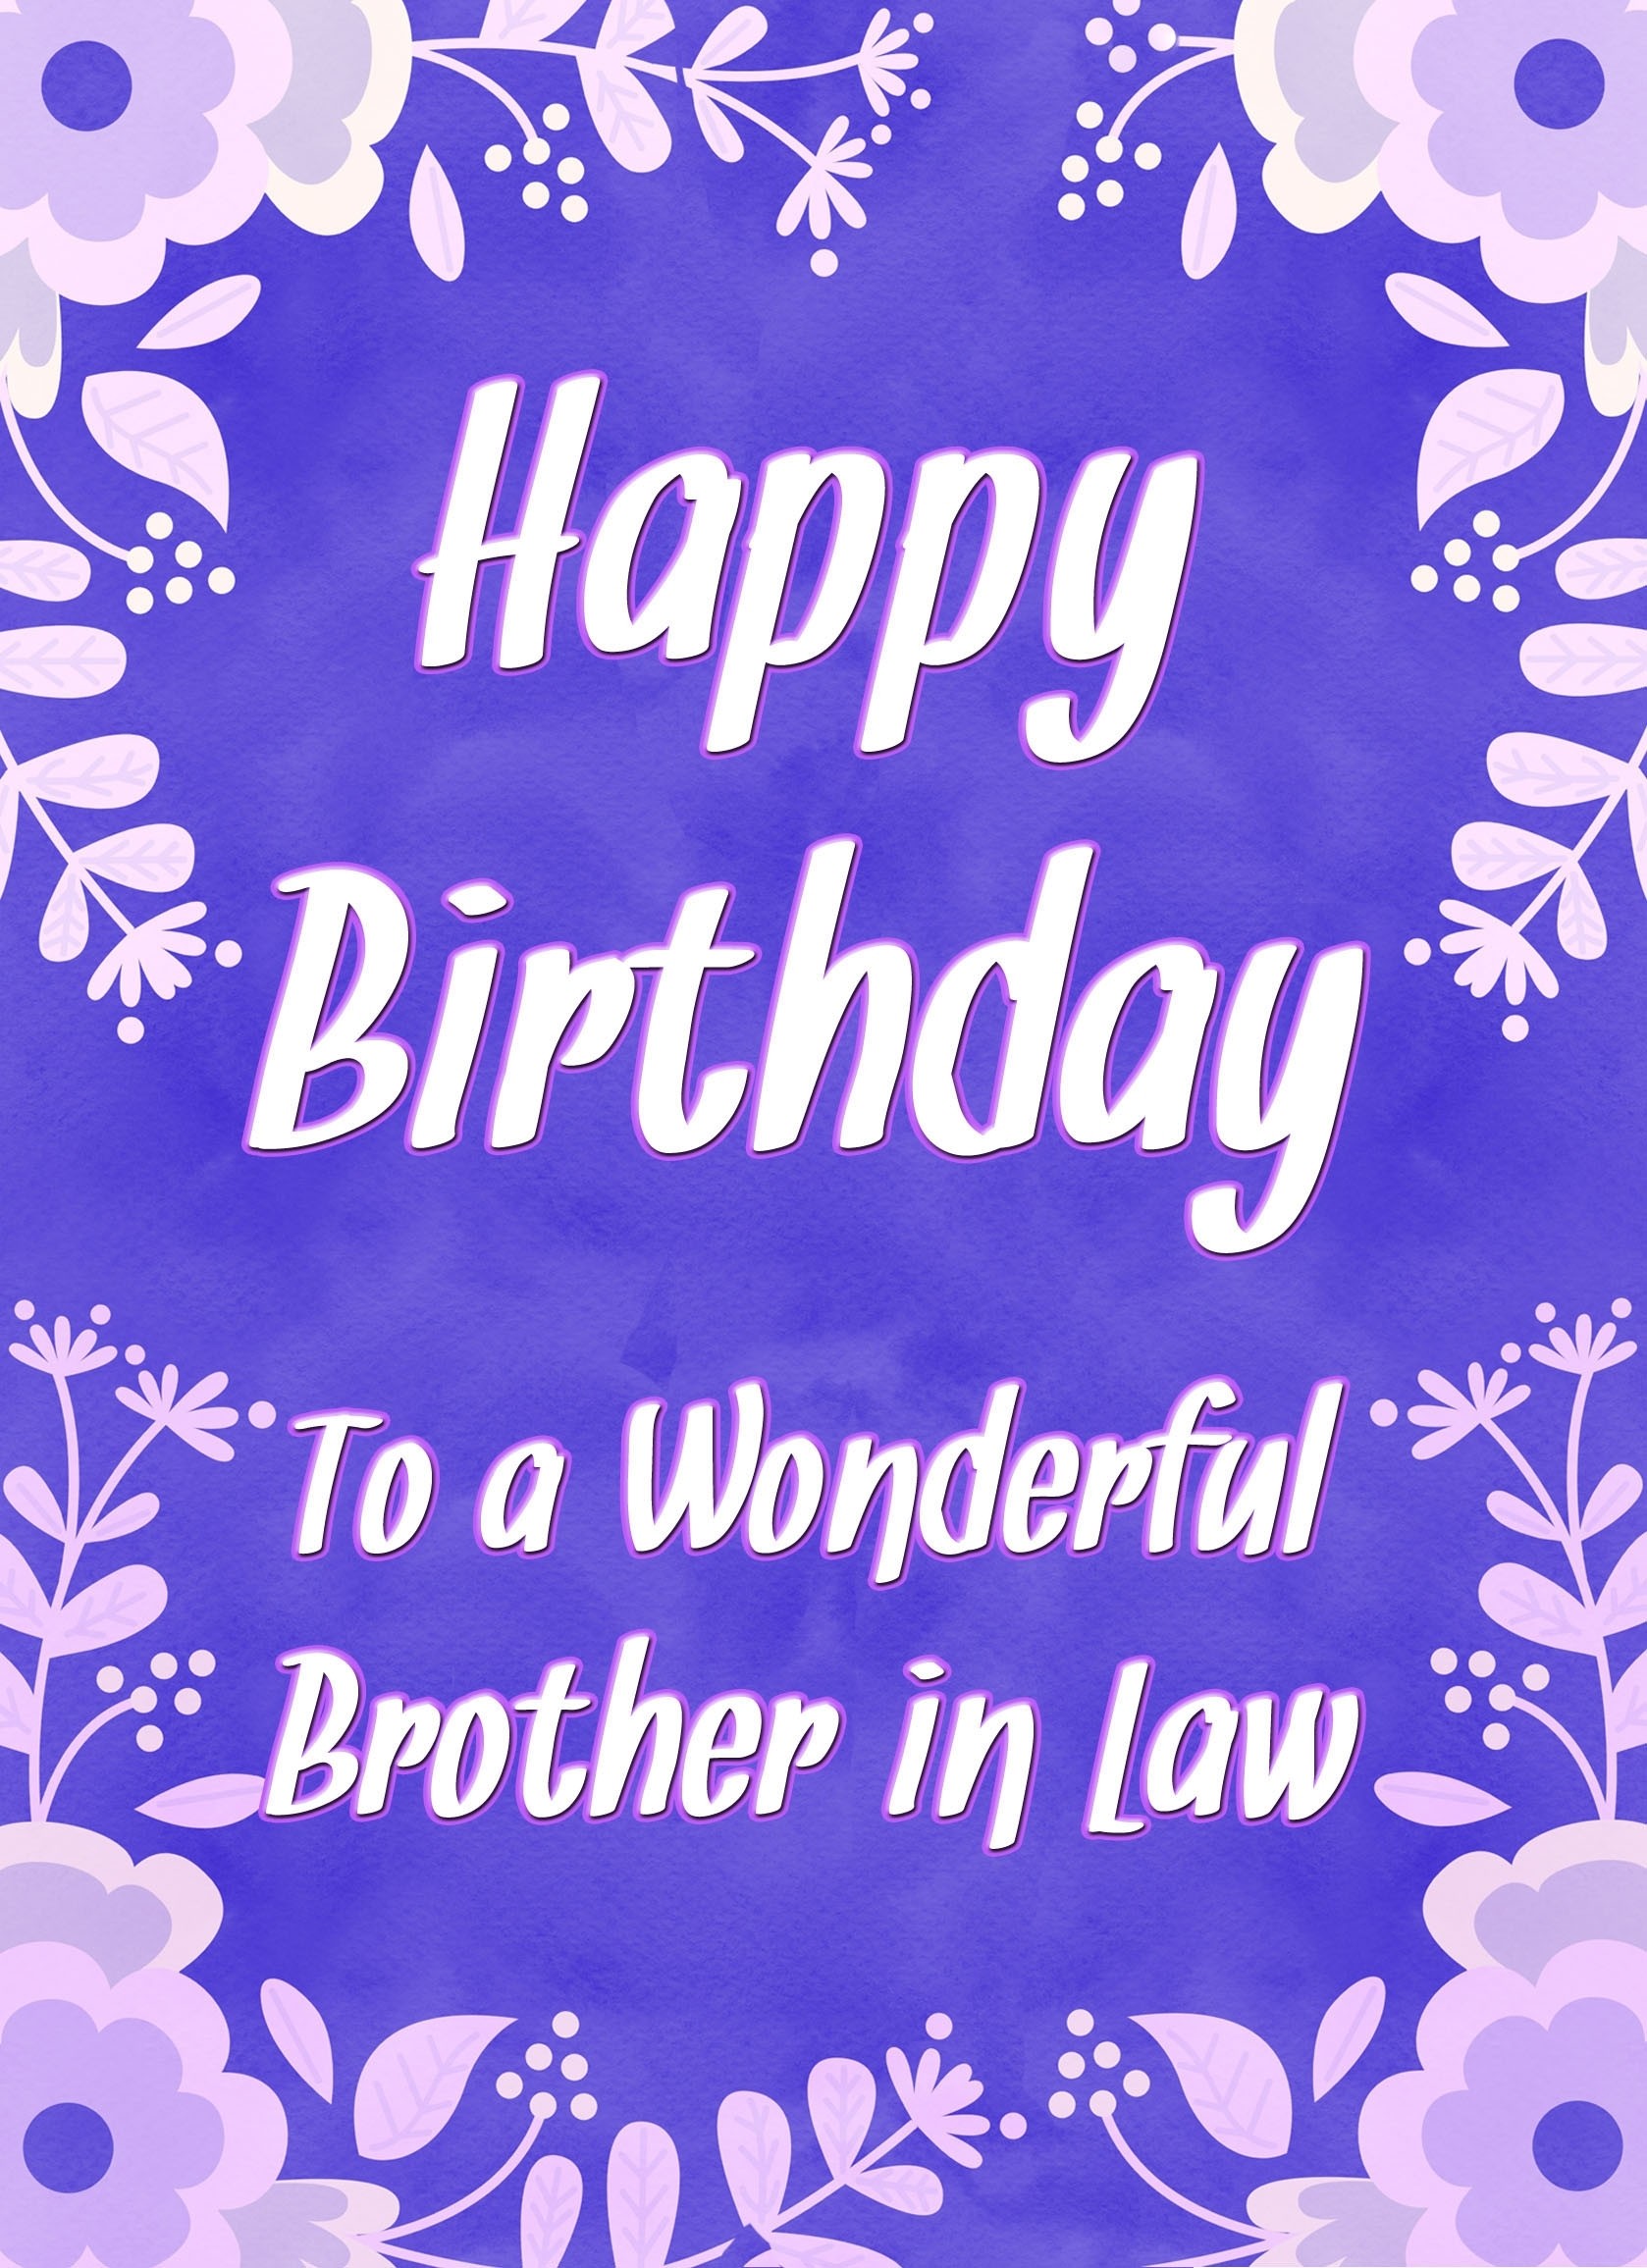 Birthday Card For Wonderful Brother in Law (Purple Border)